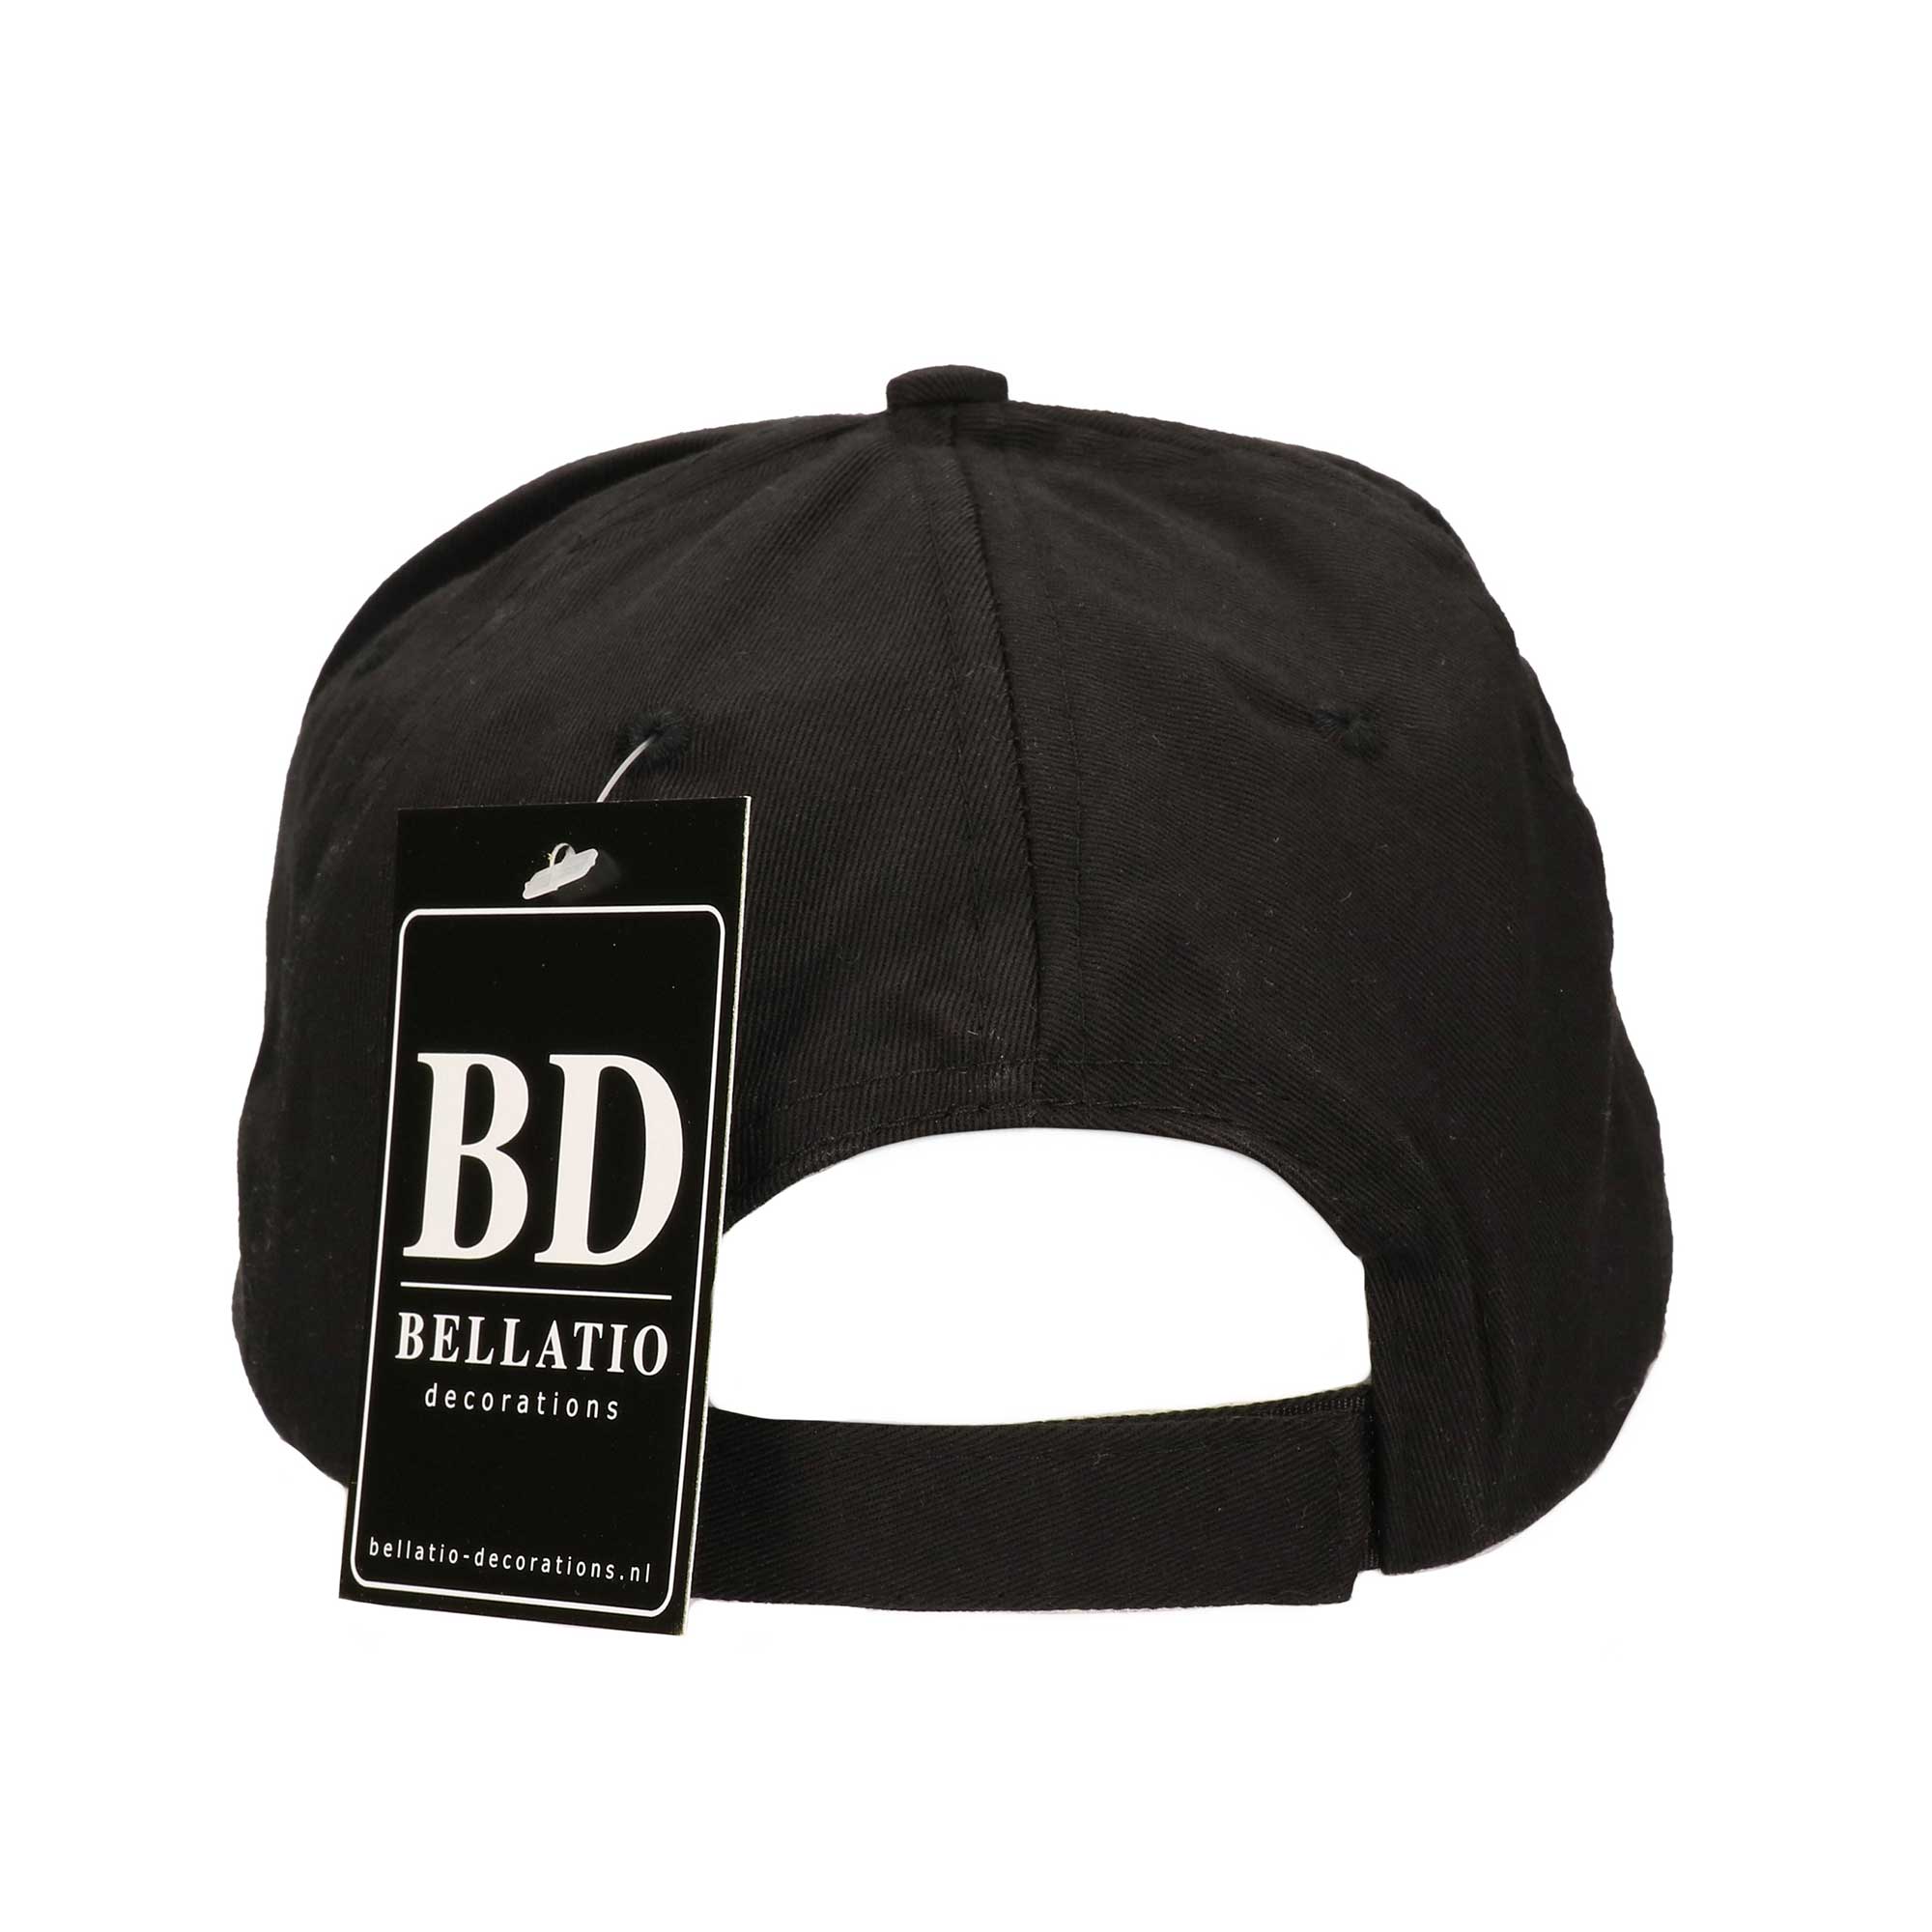 Amsterdam cap black for adults